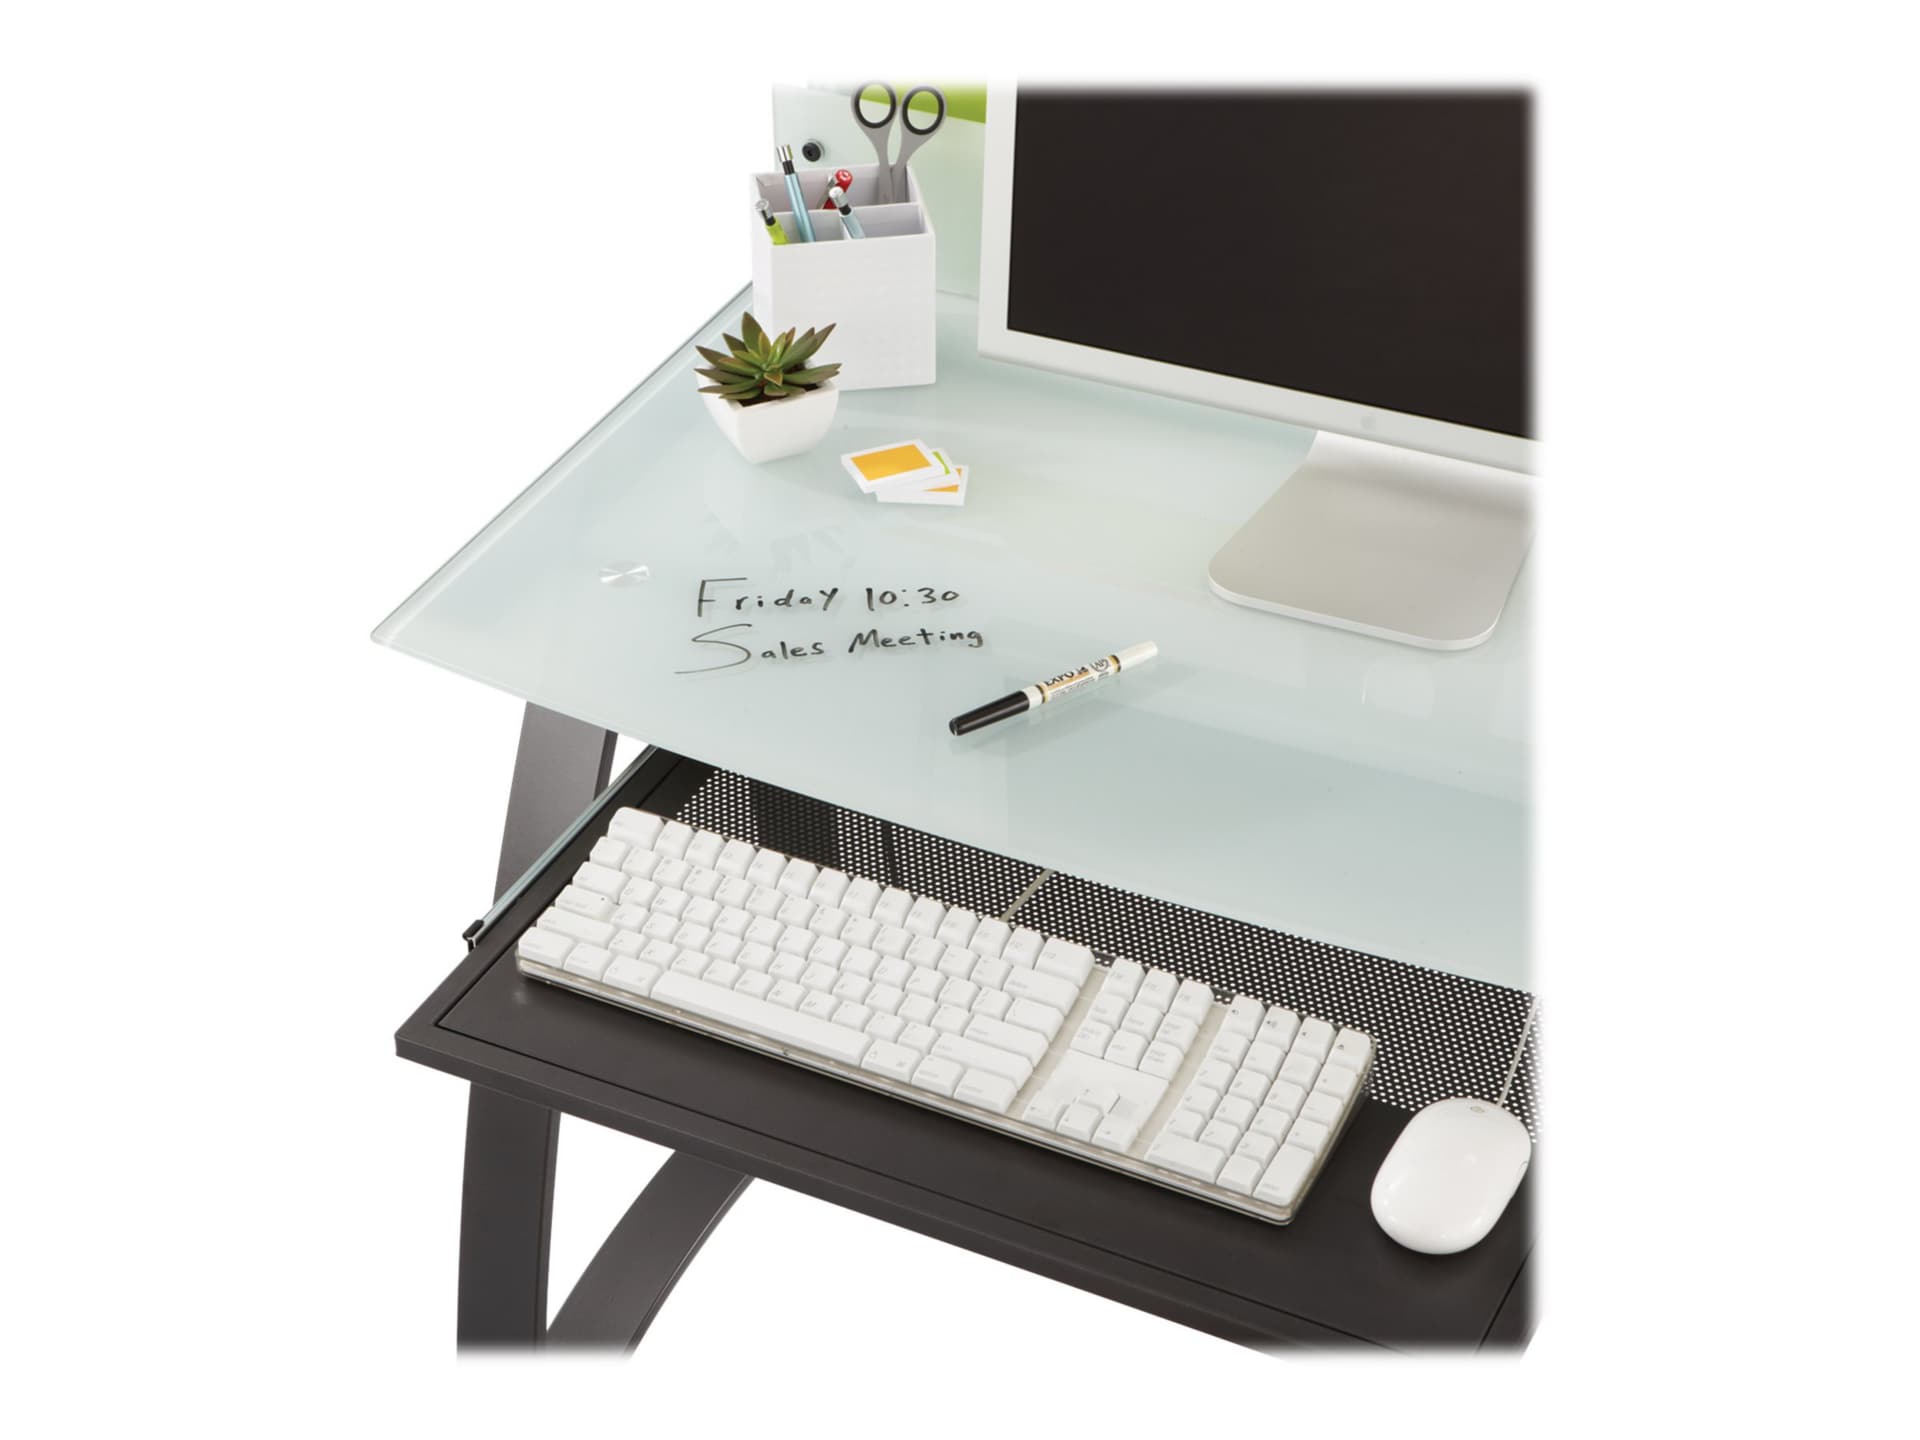 Safco Xpressions Keyboard Tray - keyboard/mouse tray